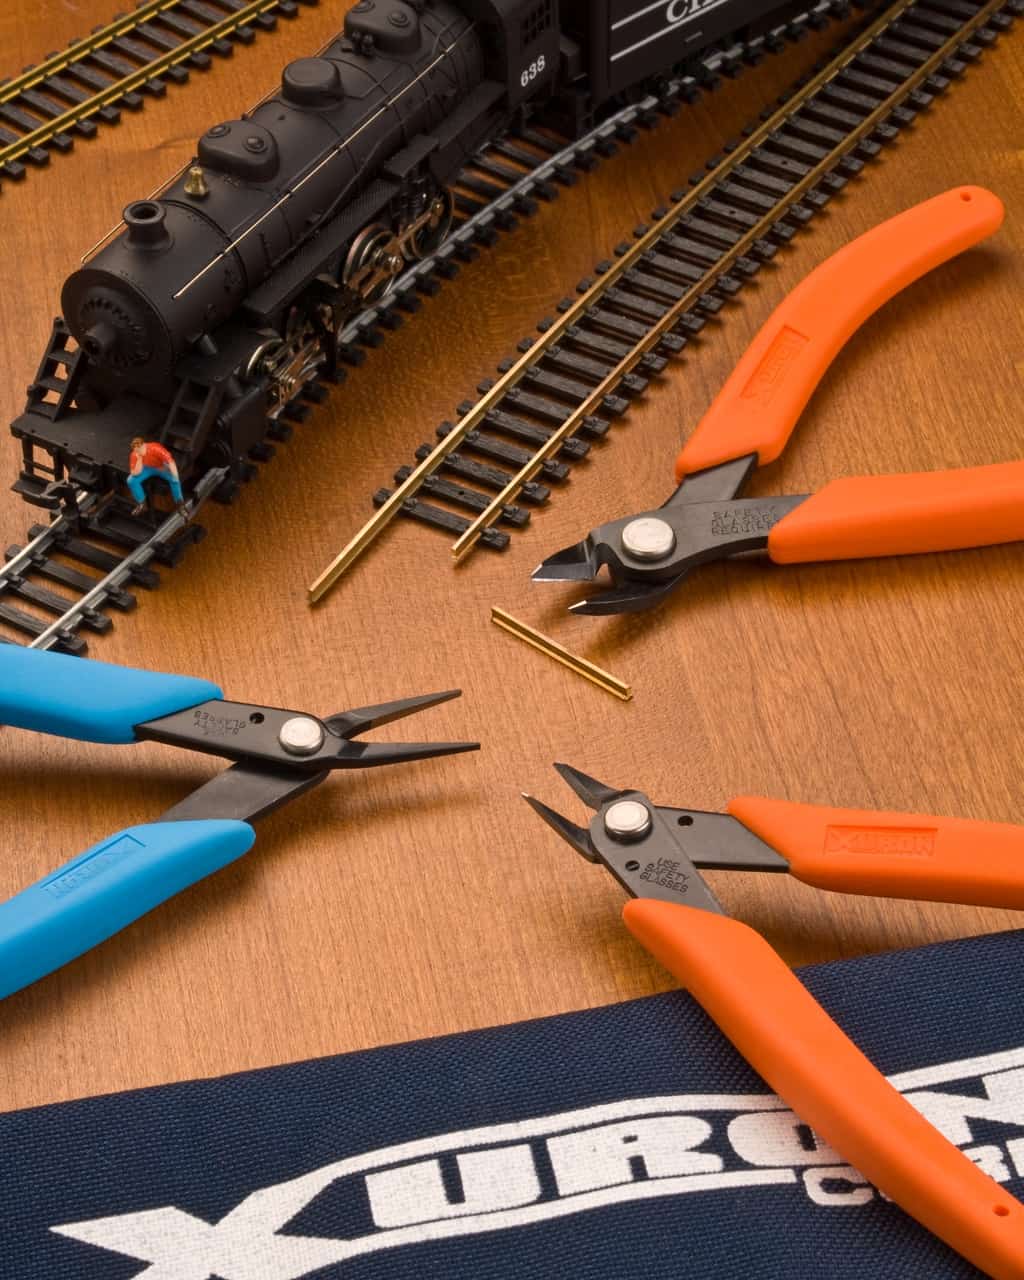 Model Hobby Tools Archives - The Xuron® Tool Blog